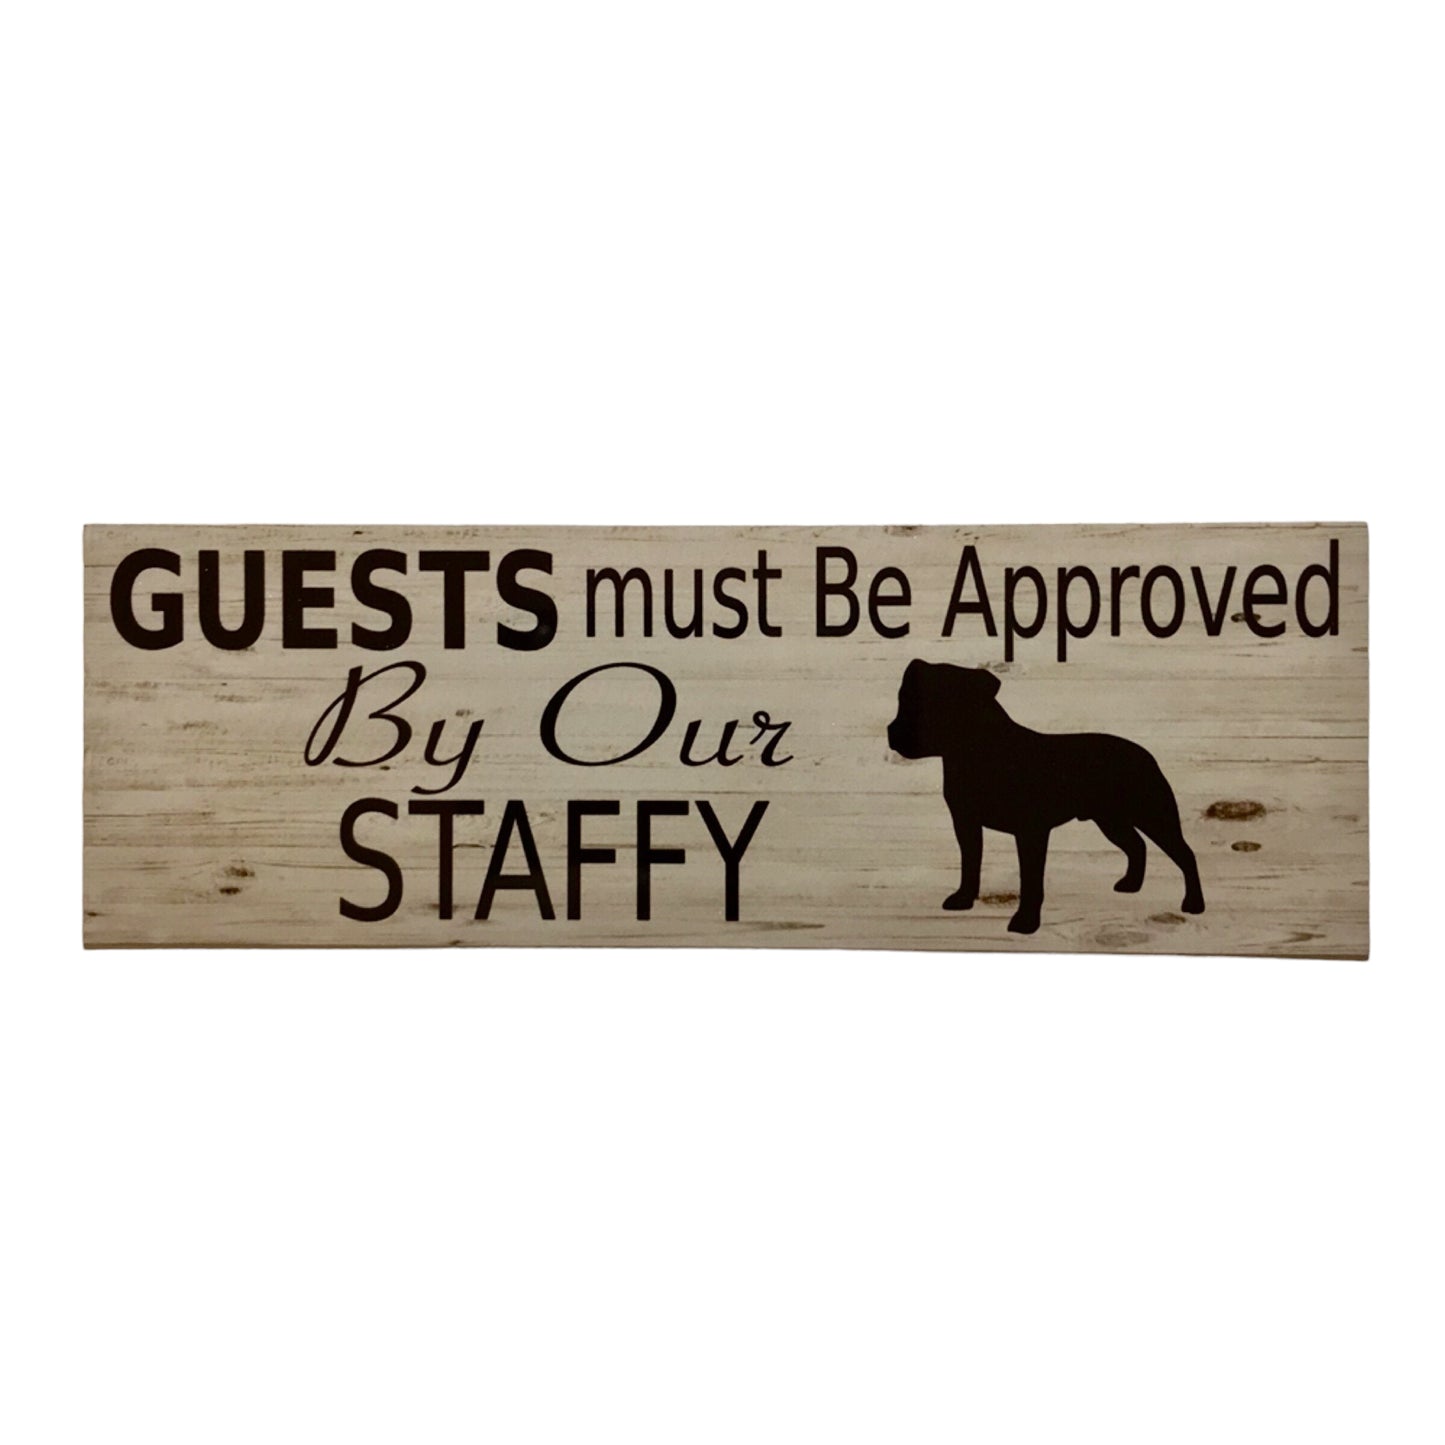 Staffy Staffdshire Dog Guests Must Be Approved By Our Sign - The Renmy Store Homewares & Gifts 